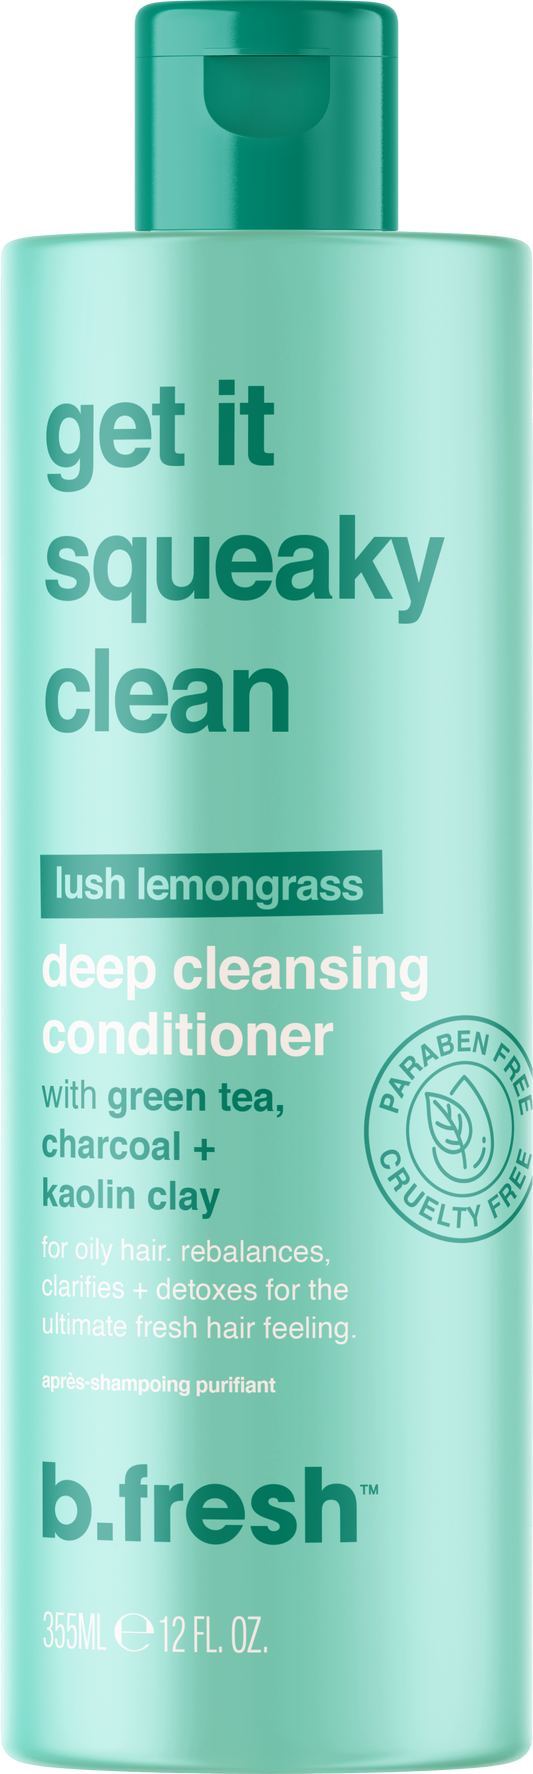 FRESH  GET IT SQUEAKY CLEEN  DEEP CLEANSING CONDITIONER 355 ML